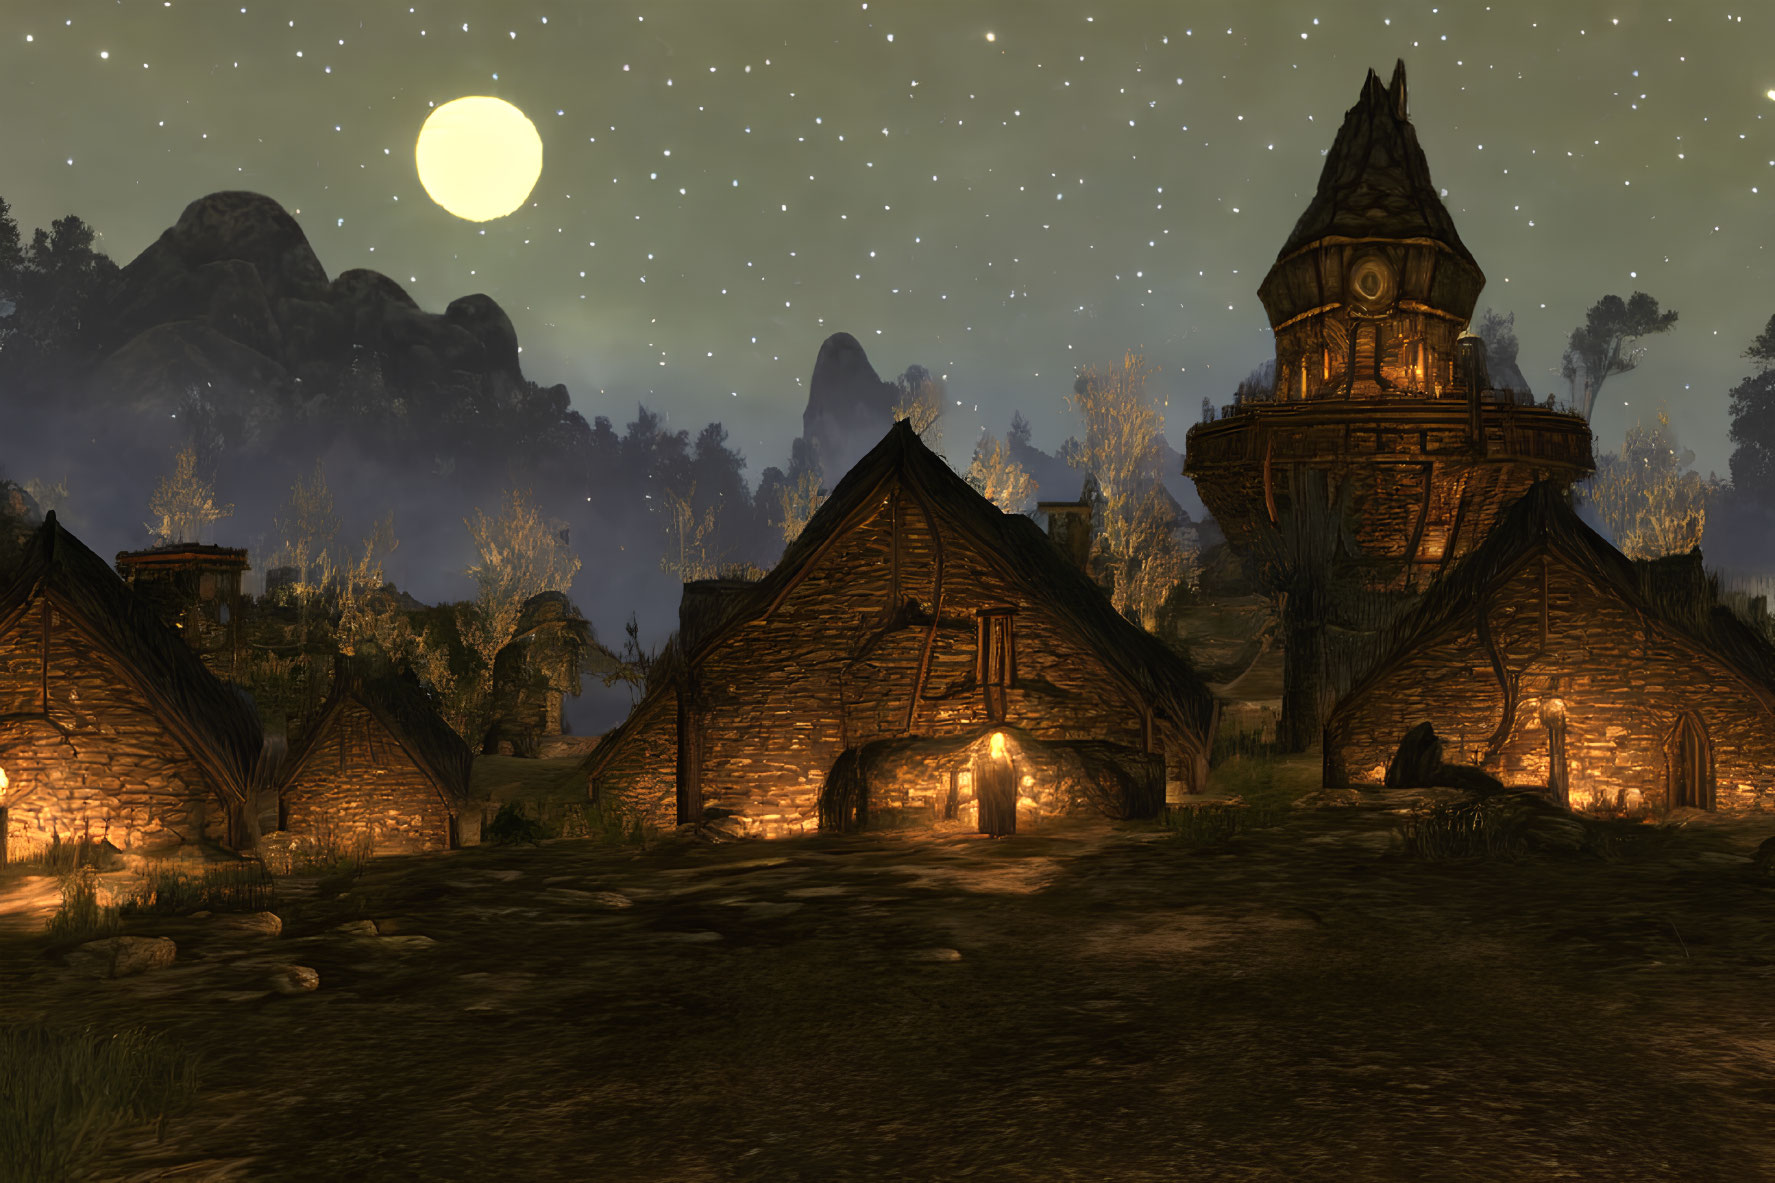 Rustic houses and tower under starry night with full moon